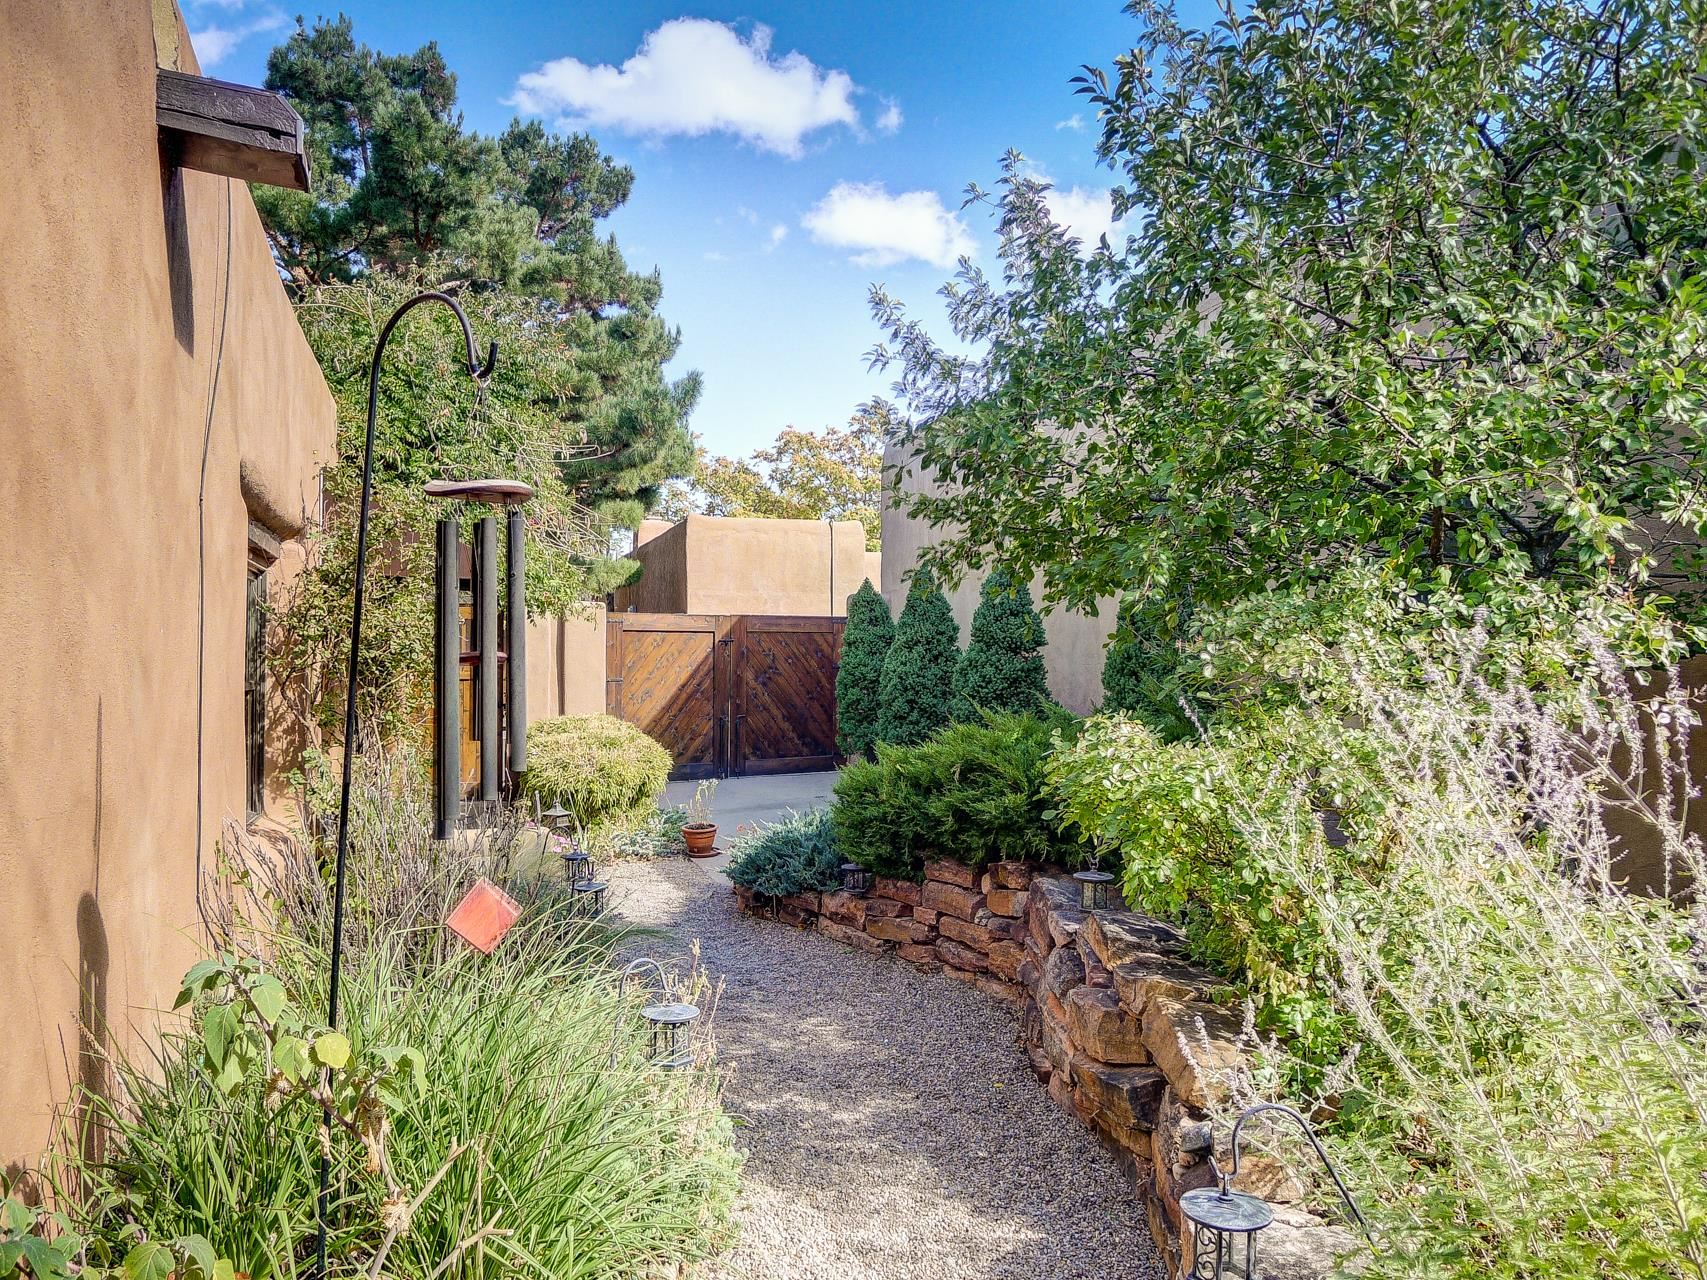 985 Agua Fria 111, Santa Fe, New Mexico 87501, 2 Bedrooms Bedrooms, ,1 BathroomBathrooms,Residential,For Sale,985 Agua Fria 111,202104673